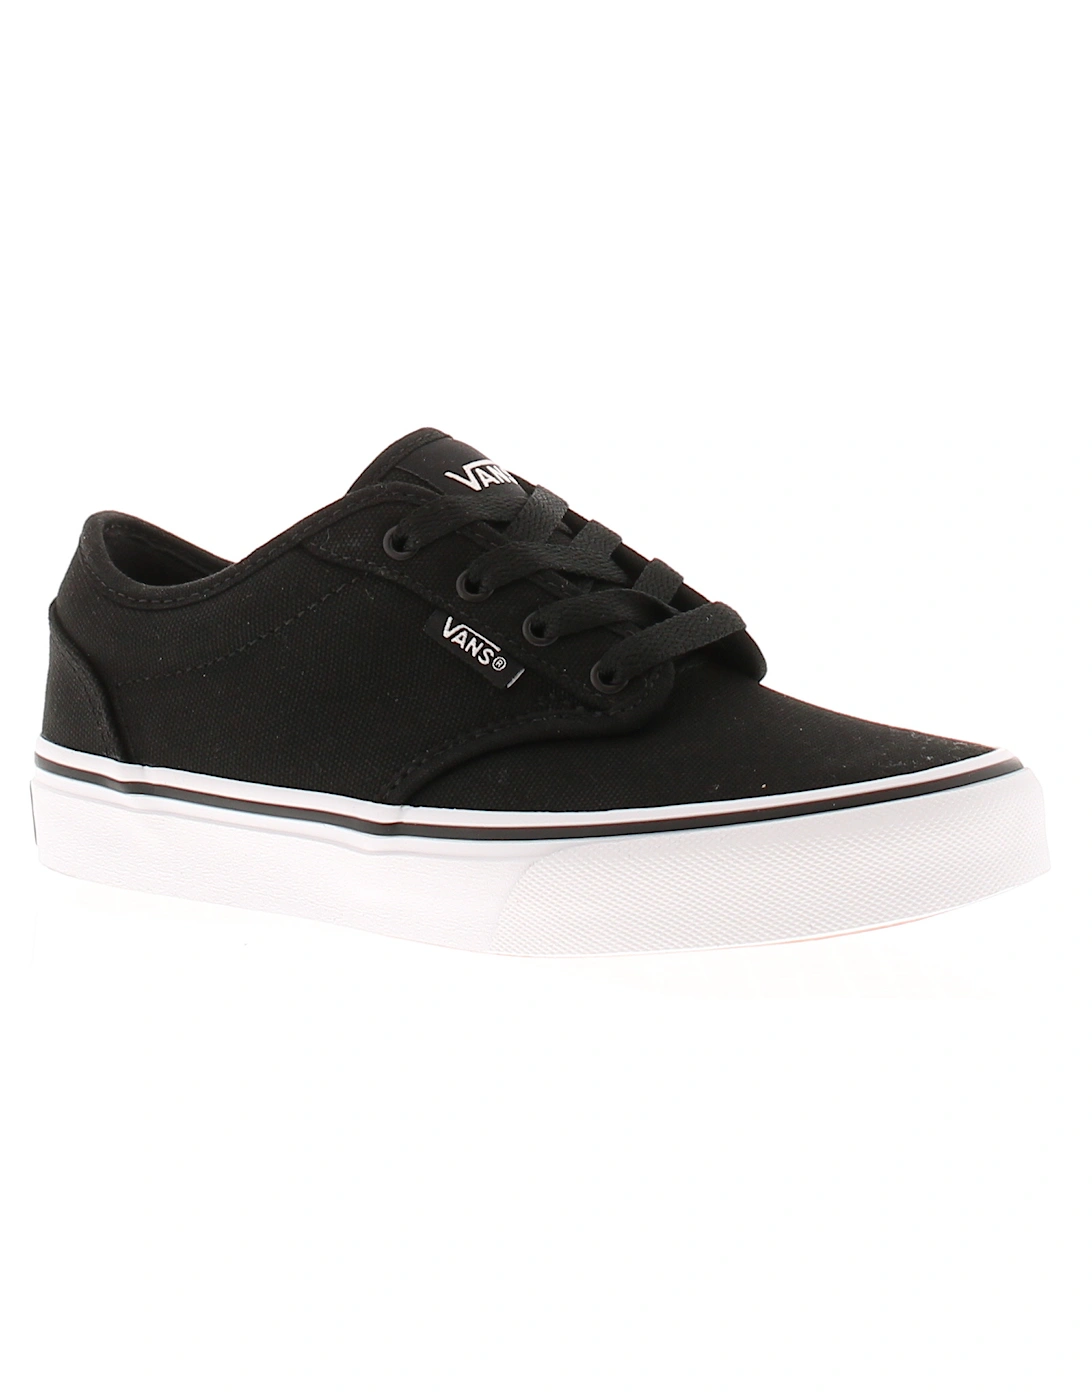 Childrens Trainers YT Atwood Lace Up black UK Size, 6 of 5